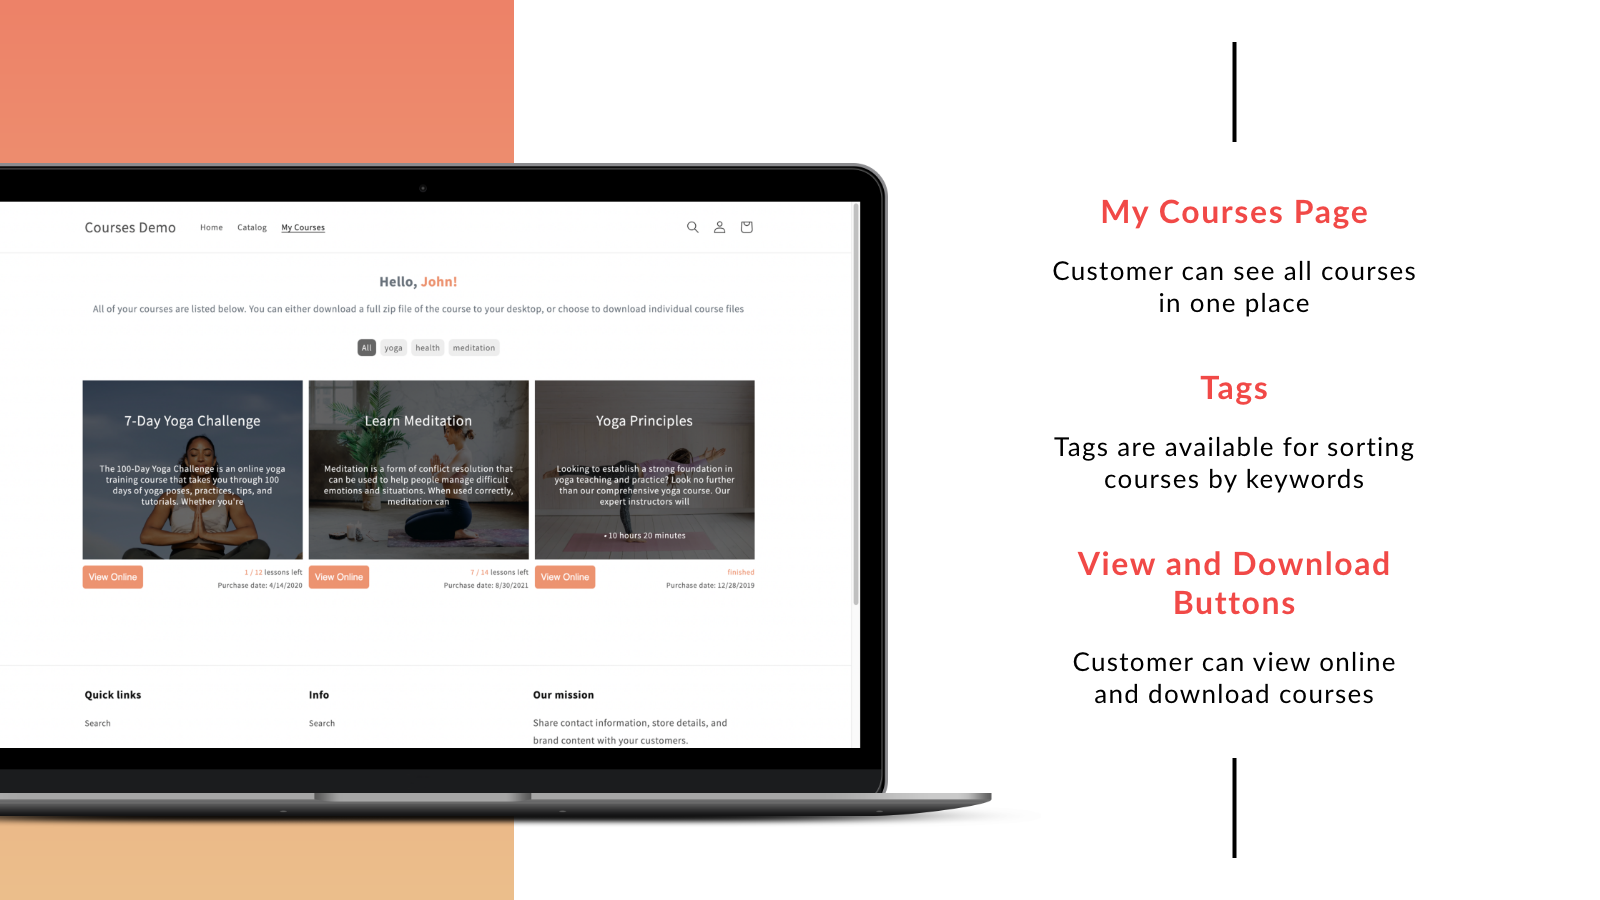 Courses – customers can view courses online or download files